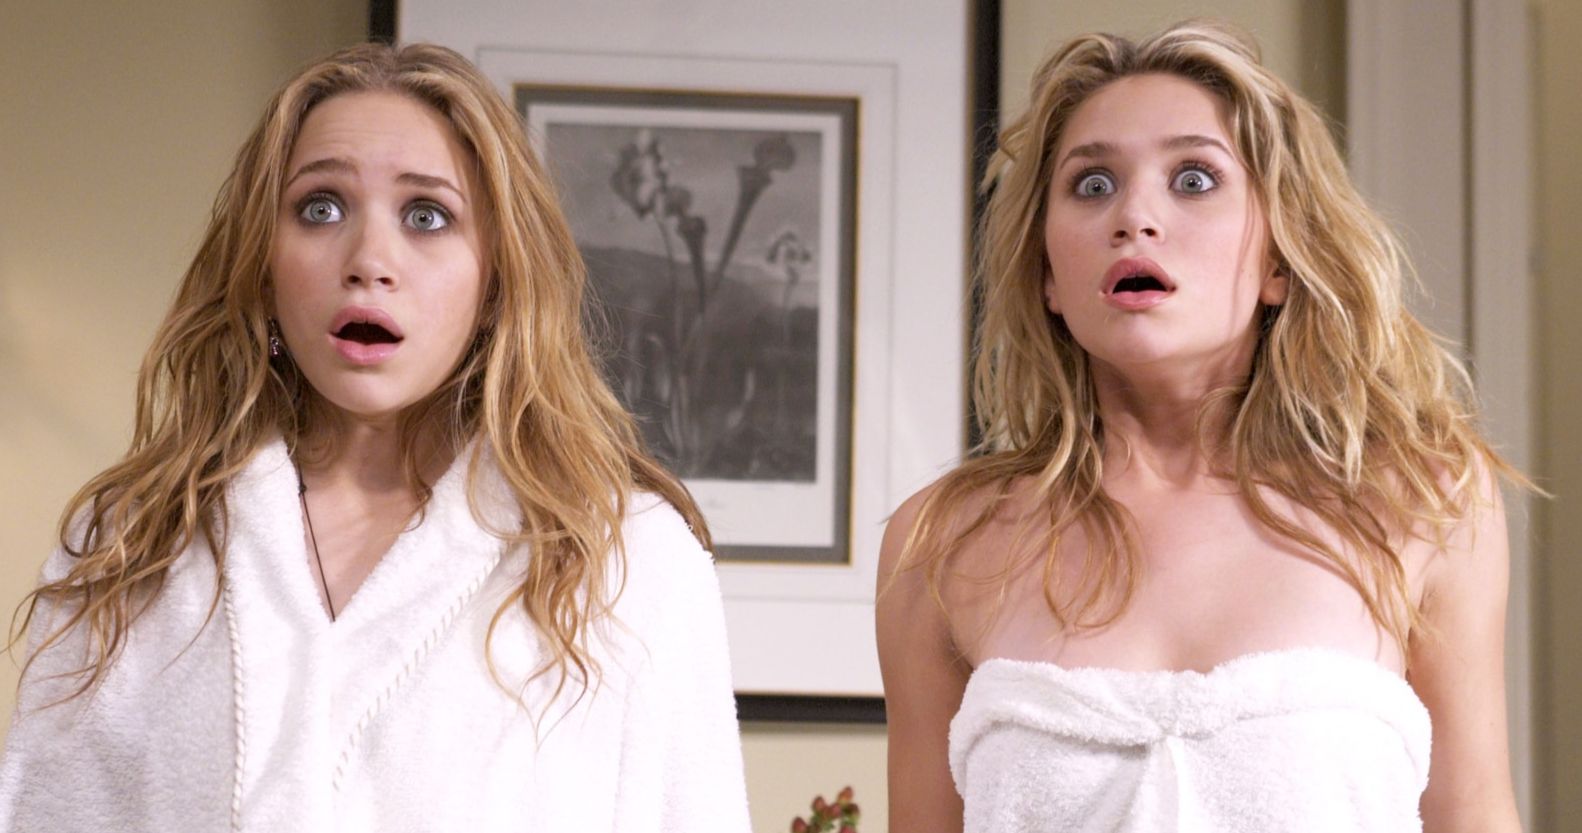 Who Did Fuller House Want to Replace the Olsen Twins With?